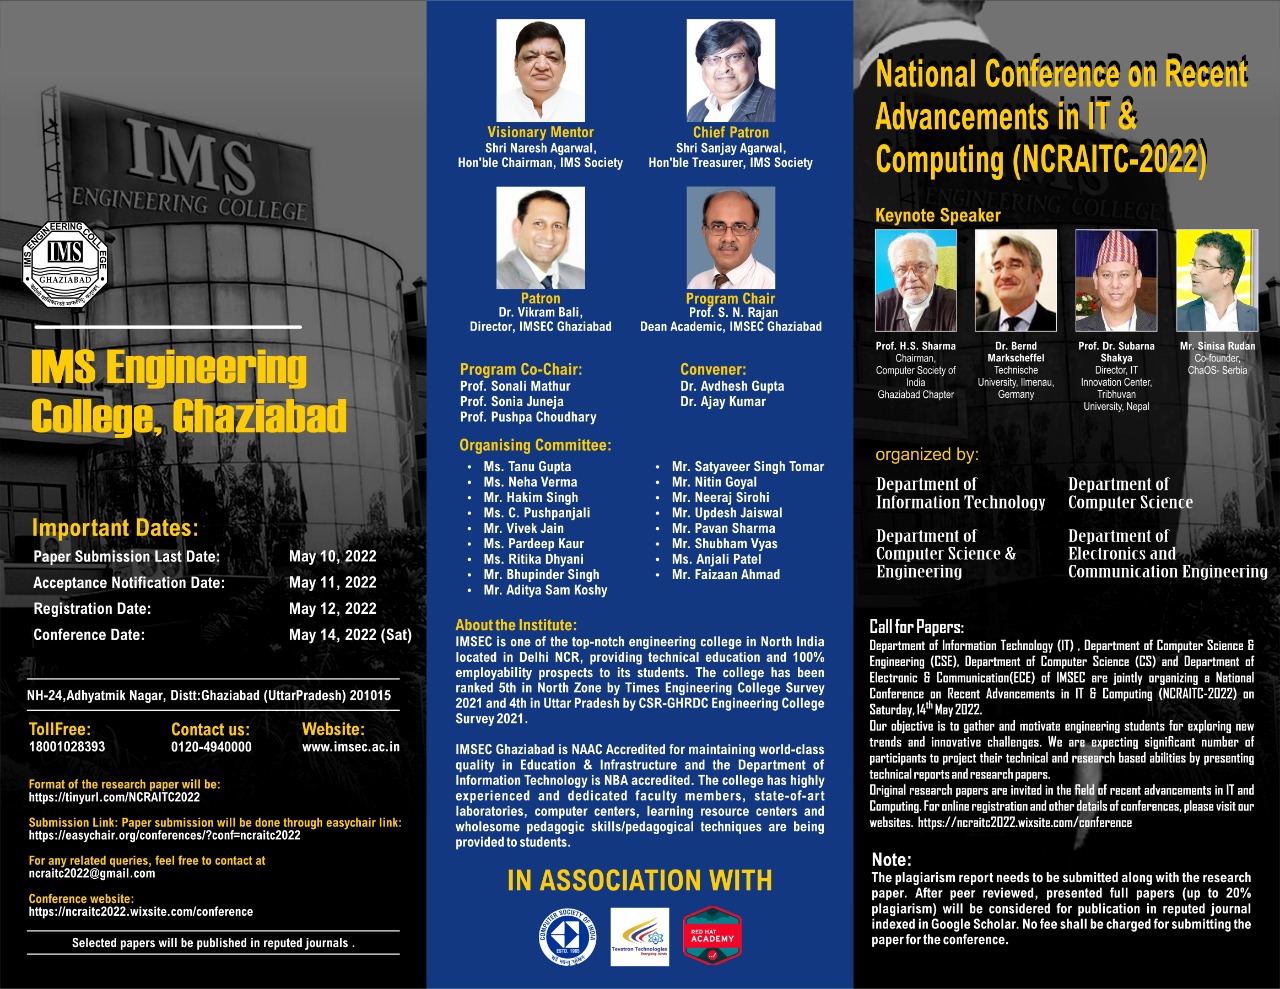 National Conference on Recents Advancements in IT & Computing